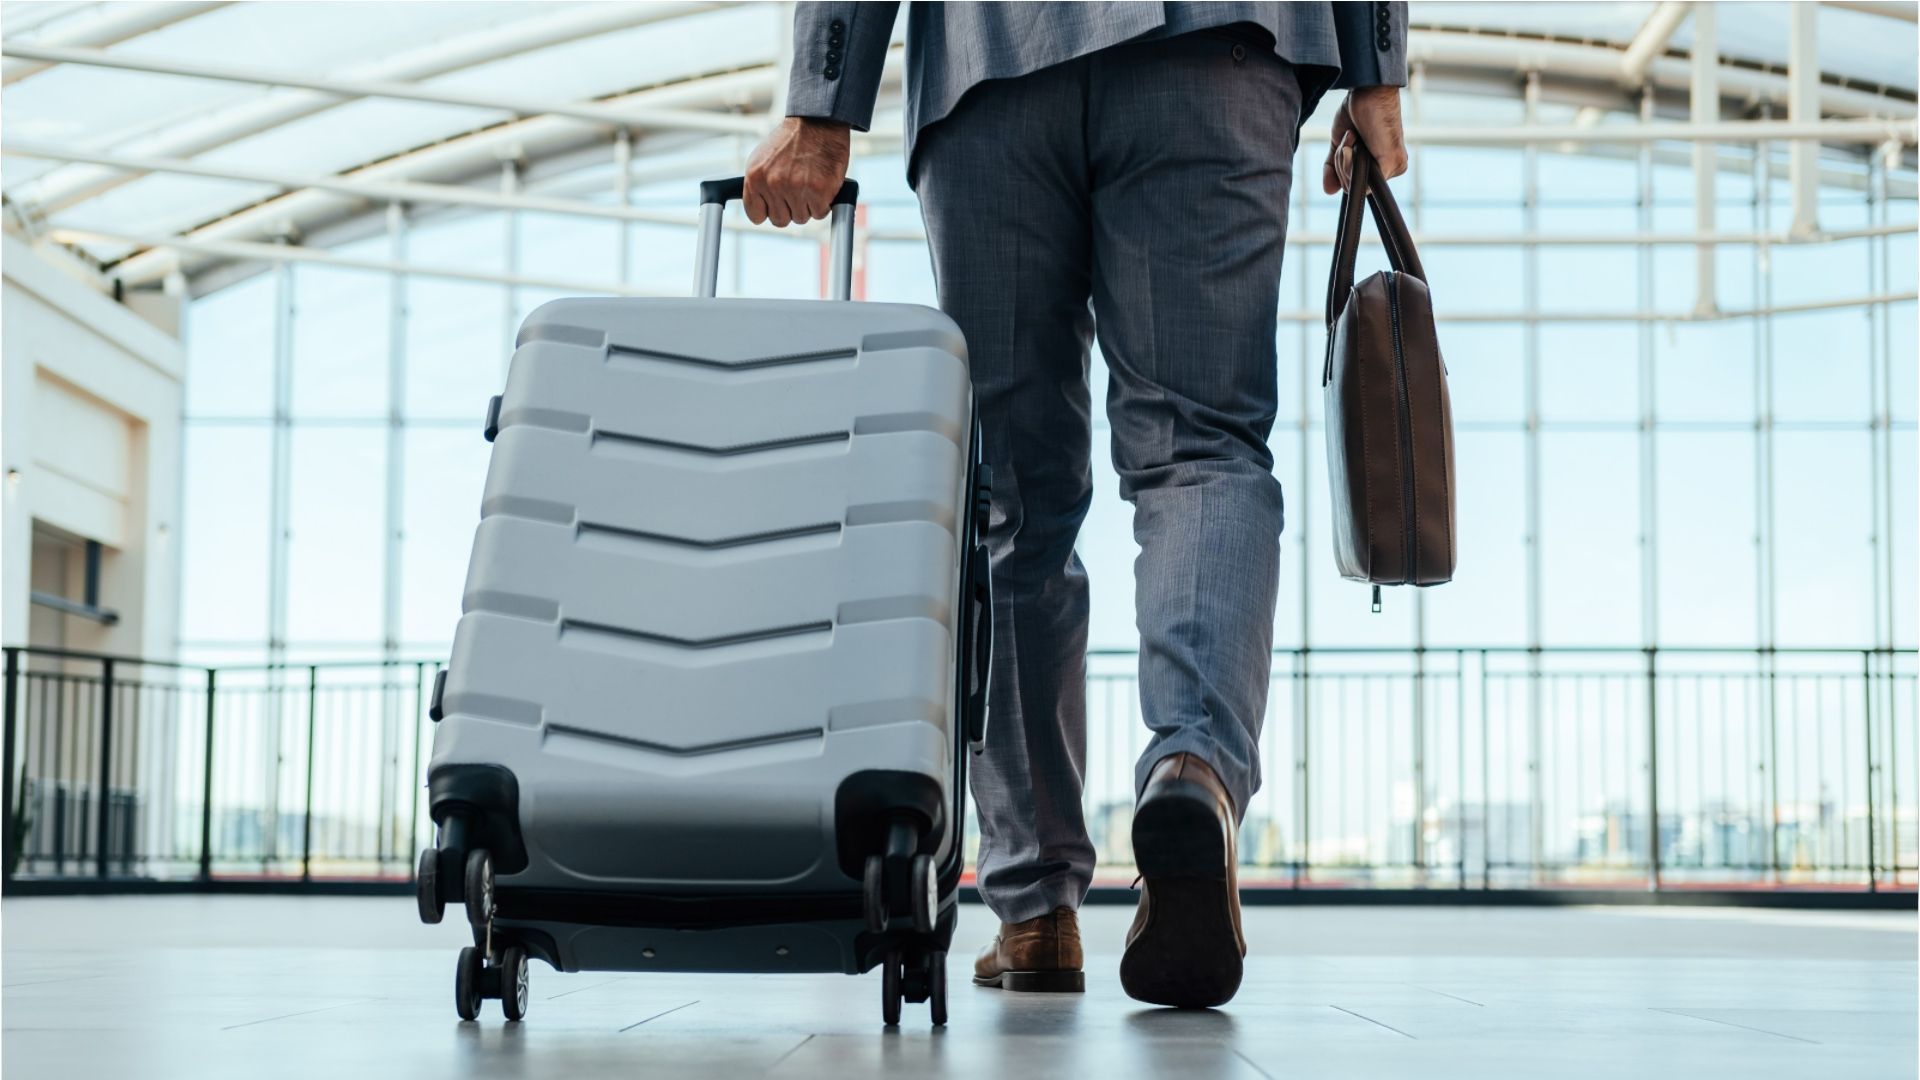 Business trip: Does travel time have to be paid?